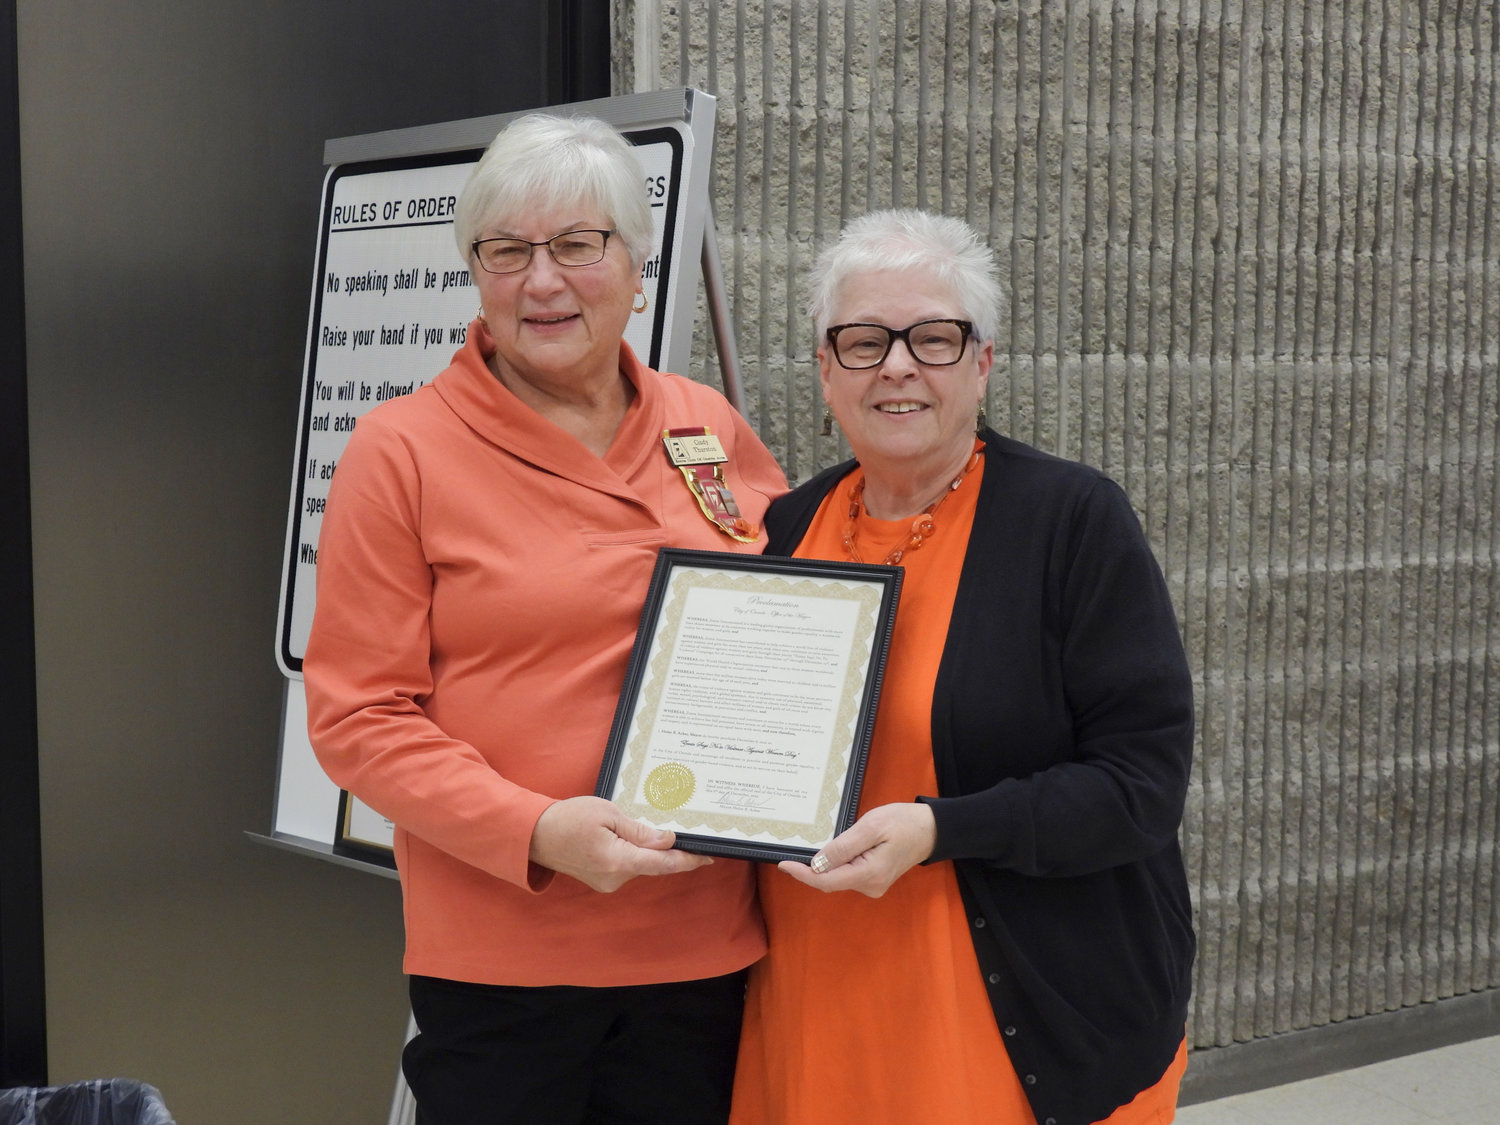 The Oneida Common Council held its regular meeting on Tuesday, Dec. 6, where Mayor Helen Acker, right, presented Oneida Area Zonta Director Cindy Thurston with a proclamation declaring Dec. 6, 2022, as "Zonta Says No to Violence Against Women Day," recognizing the Zonta awareness campaign of violence against women for 16 consecutive days from Nov. 25 to Dec. 10.